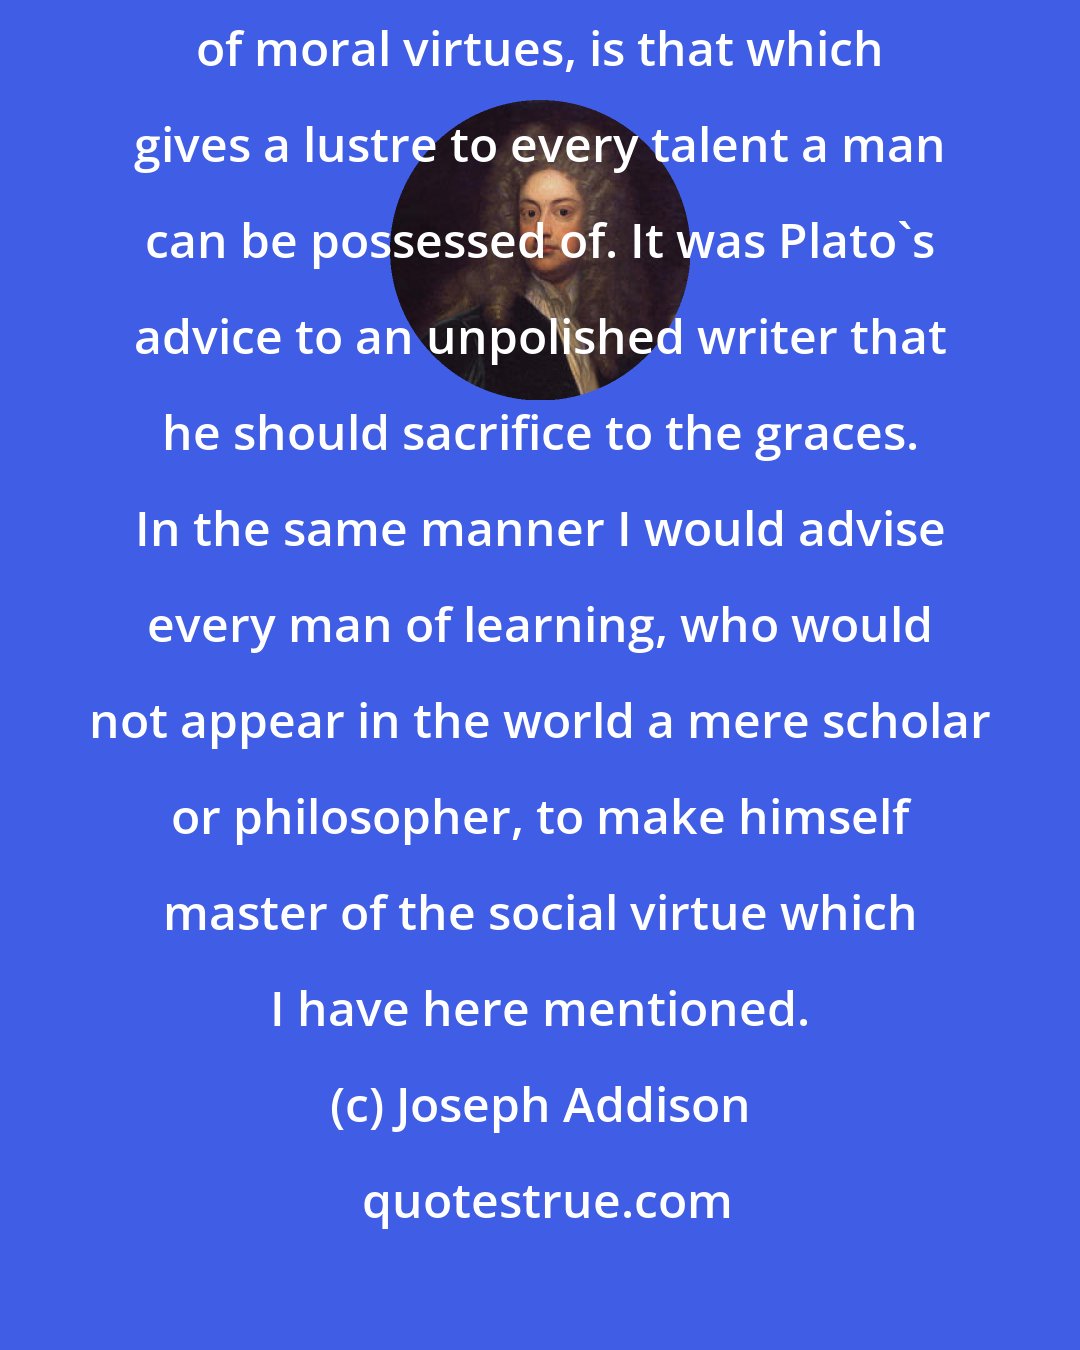 Joseph Addison: Complaisance, though in itself it be scarce reckoned in the number of moral virtues, is that which gives a lustre to every talent a man can be possessed of. It was Plato's advice to an unpolished writer that he should sacrifice to the graces. In the same manner I would advise every man of learning, who would not appear in the world a mere scholar or philosopher, to make himself master of the social virtue which I have here mentioned.